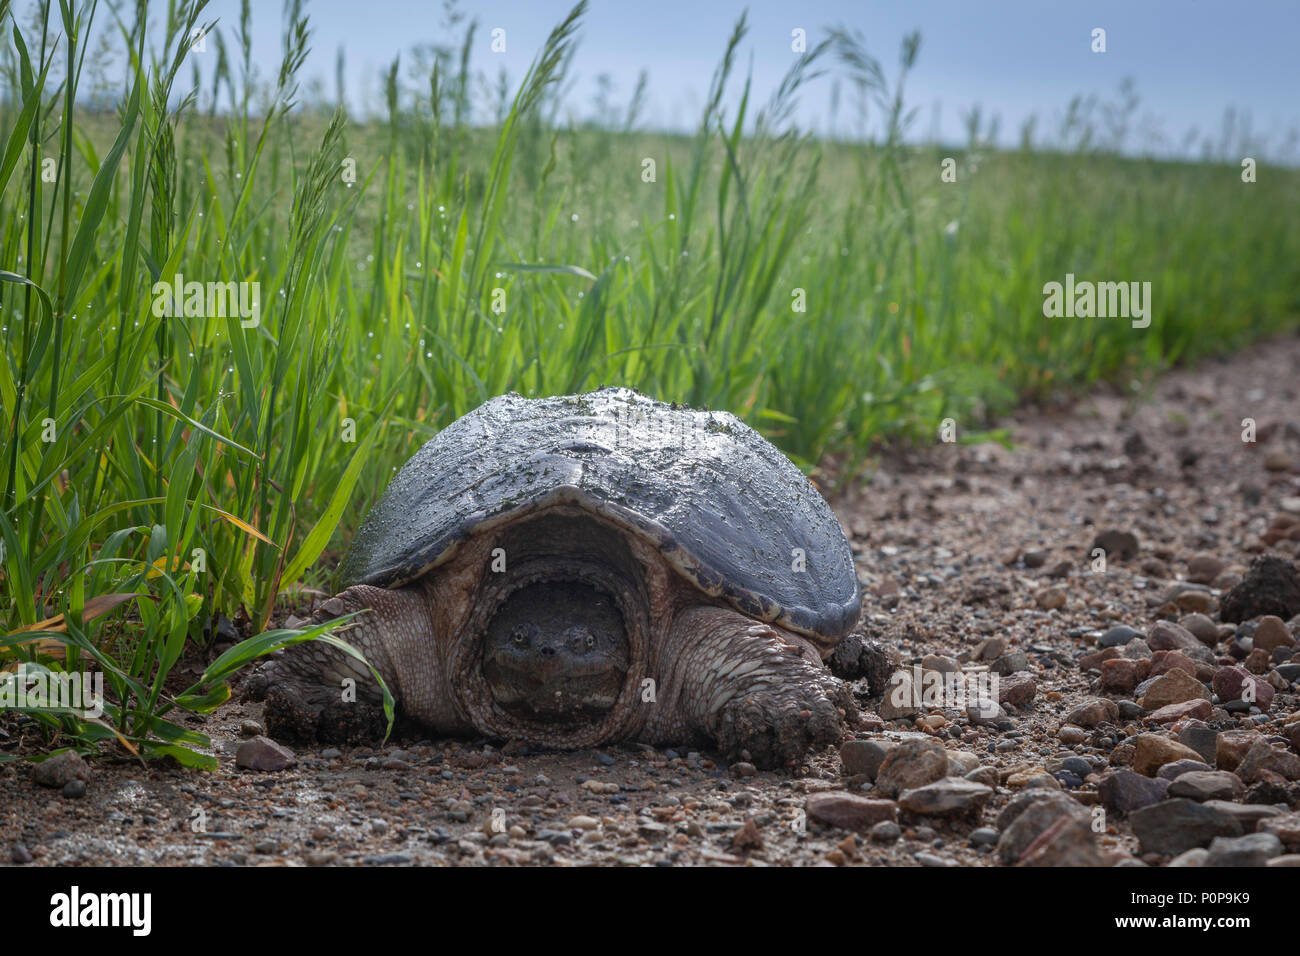 Large female Snapping Turtle digs up the gravel along the side of the road to lay eggs. Stock Photo